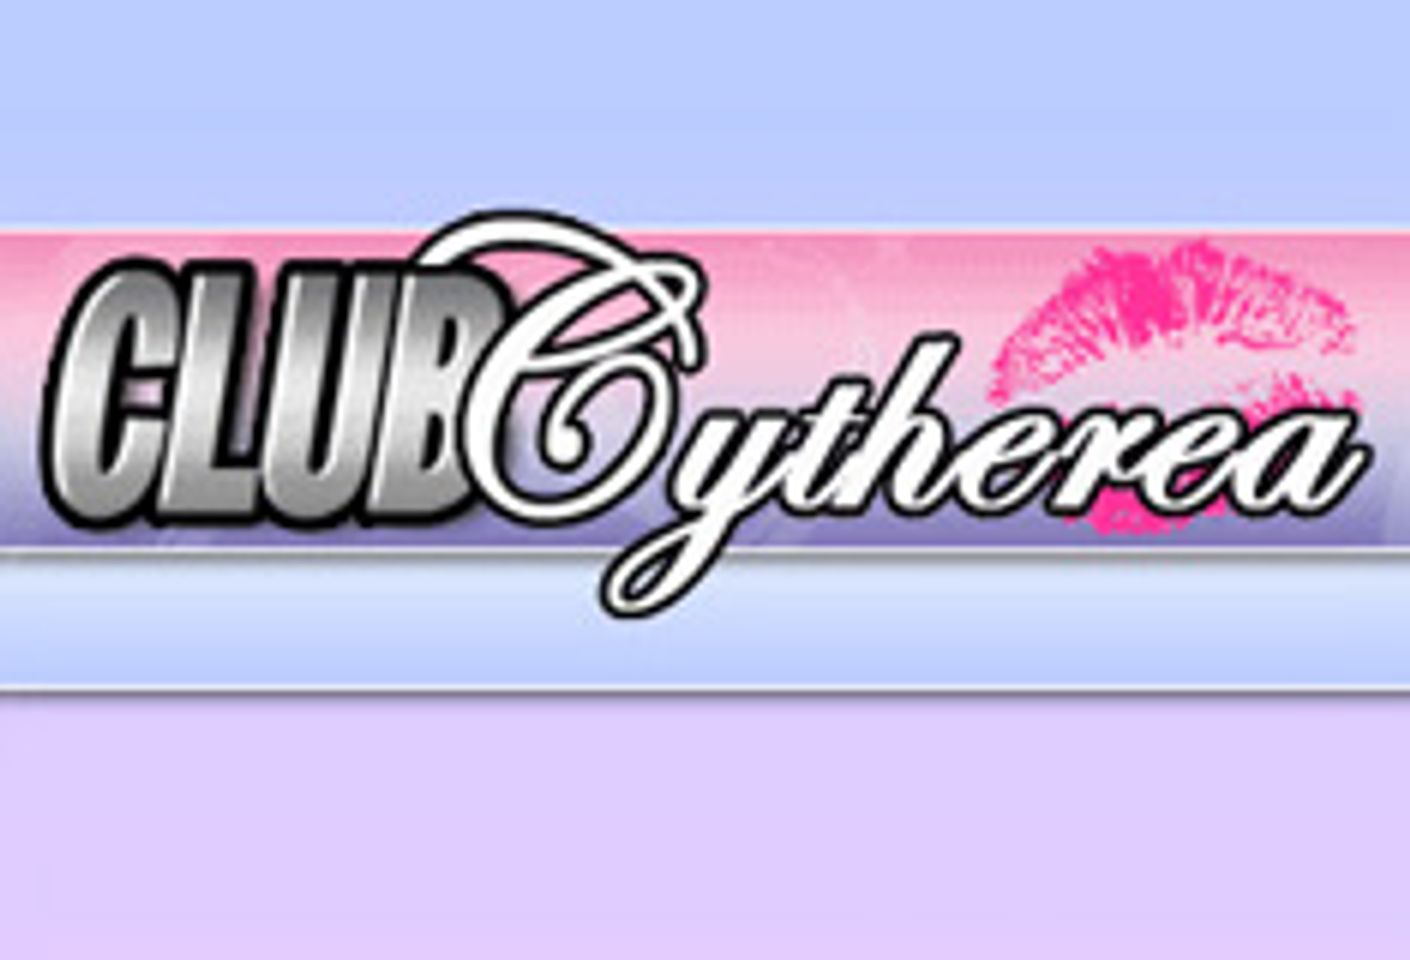 NSCash Launches ClubCytherea.com